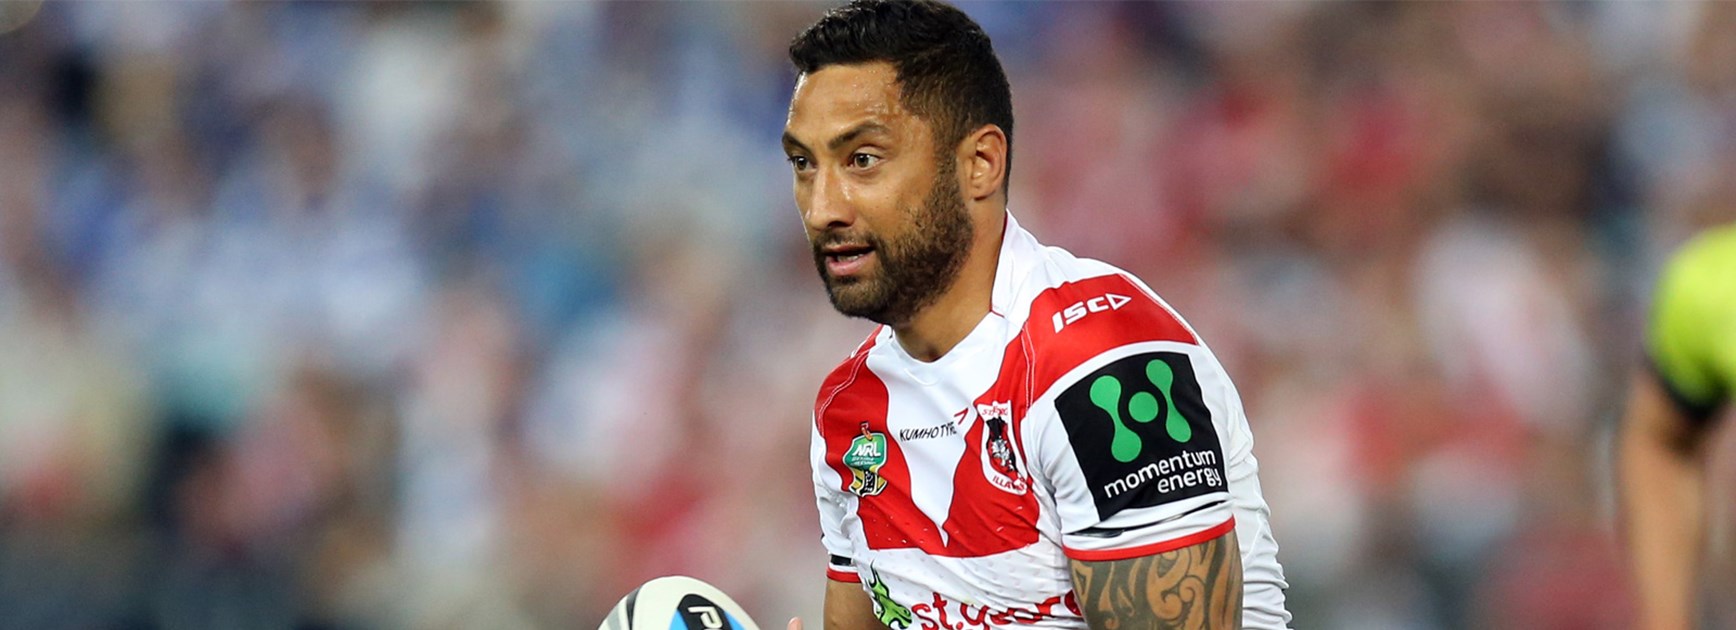 Benji Marshall turned back the clock to show off some trademark footwork before being injured against the Bulldogs.